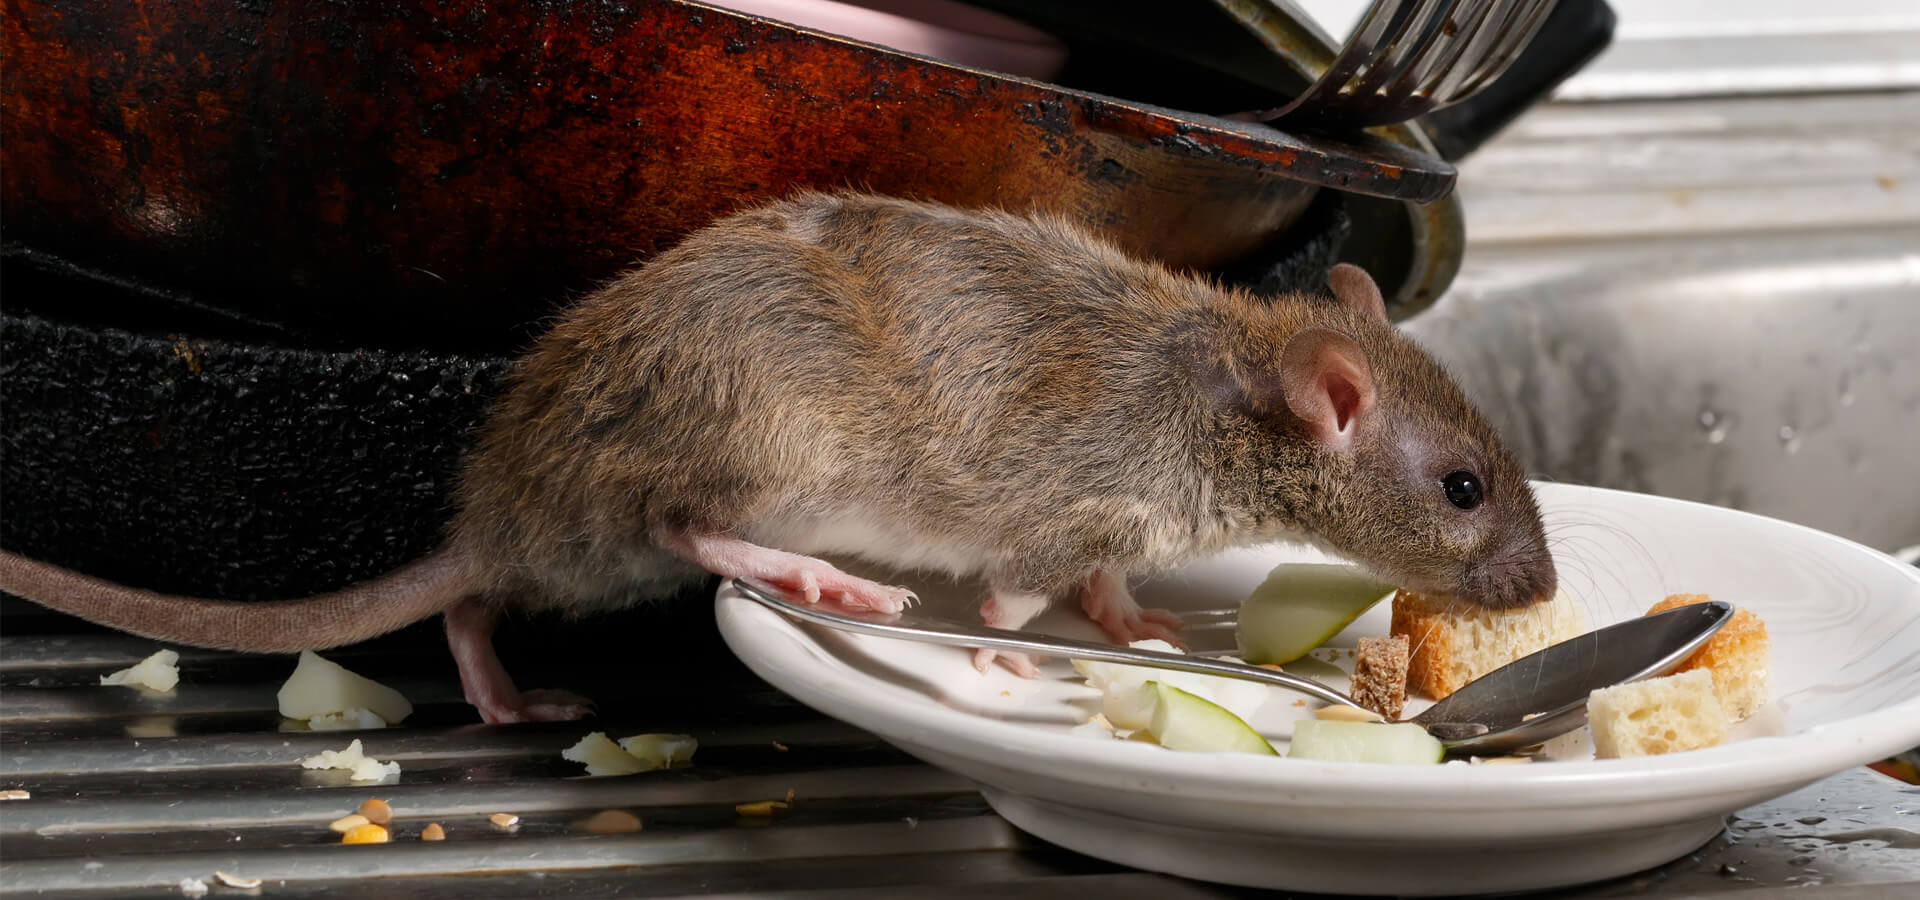 Rat Crawling Over Plates On Kitchen Counter